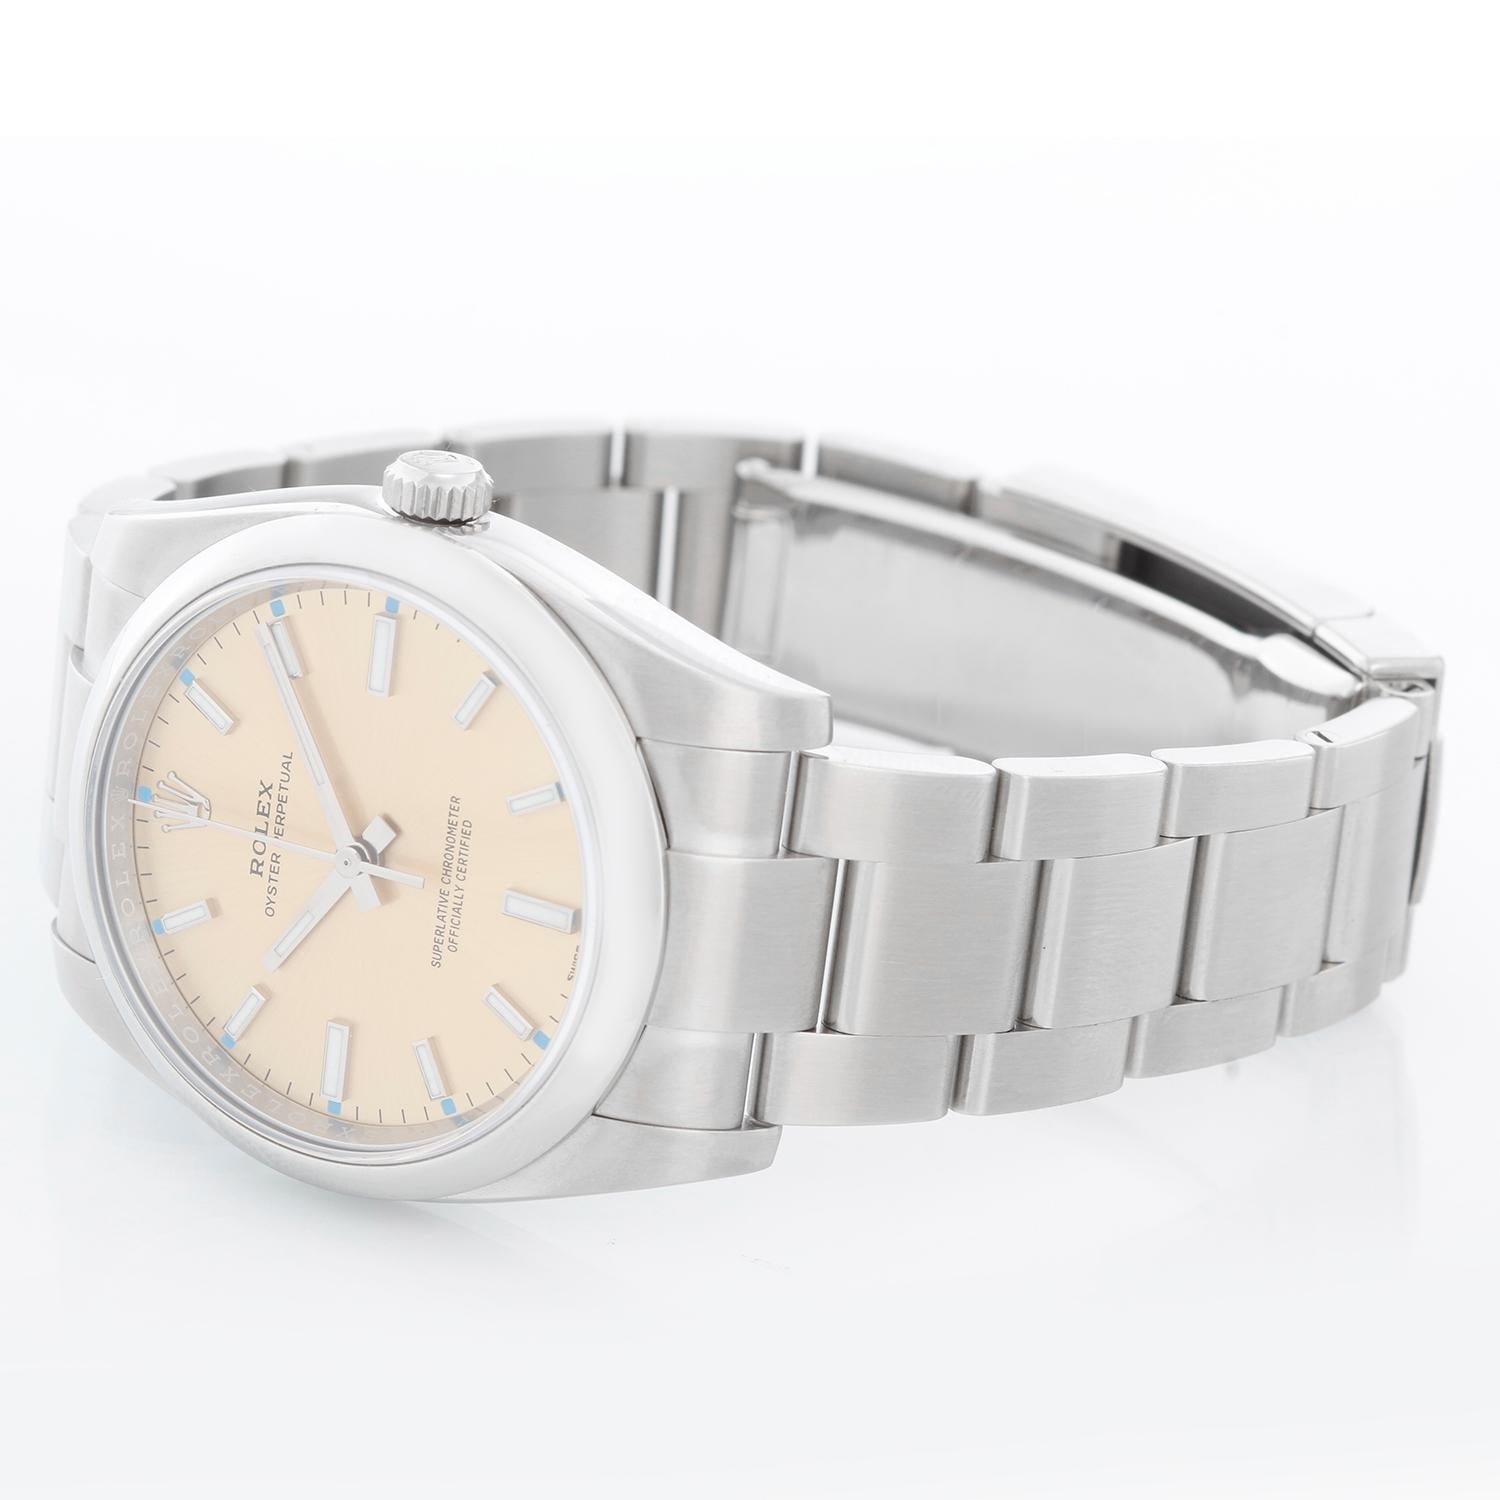 Rolex Oyster Perpetual  Stainless Steel Watch 114200 - Automatic winding, 31 jewels, no-date, sapphire crystal. Stainless steel case with stainless steel smooth bezel (34mm diameter). Champagne dial with index marker and blue tickers. Stainless